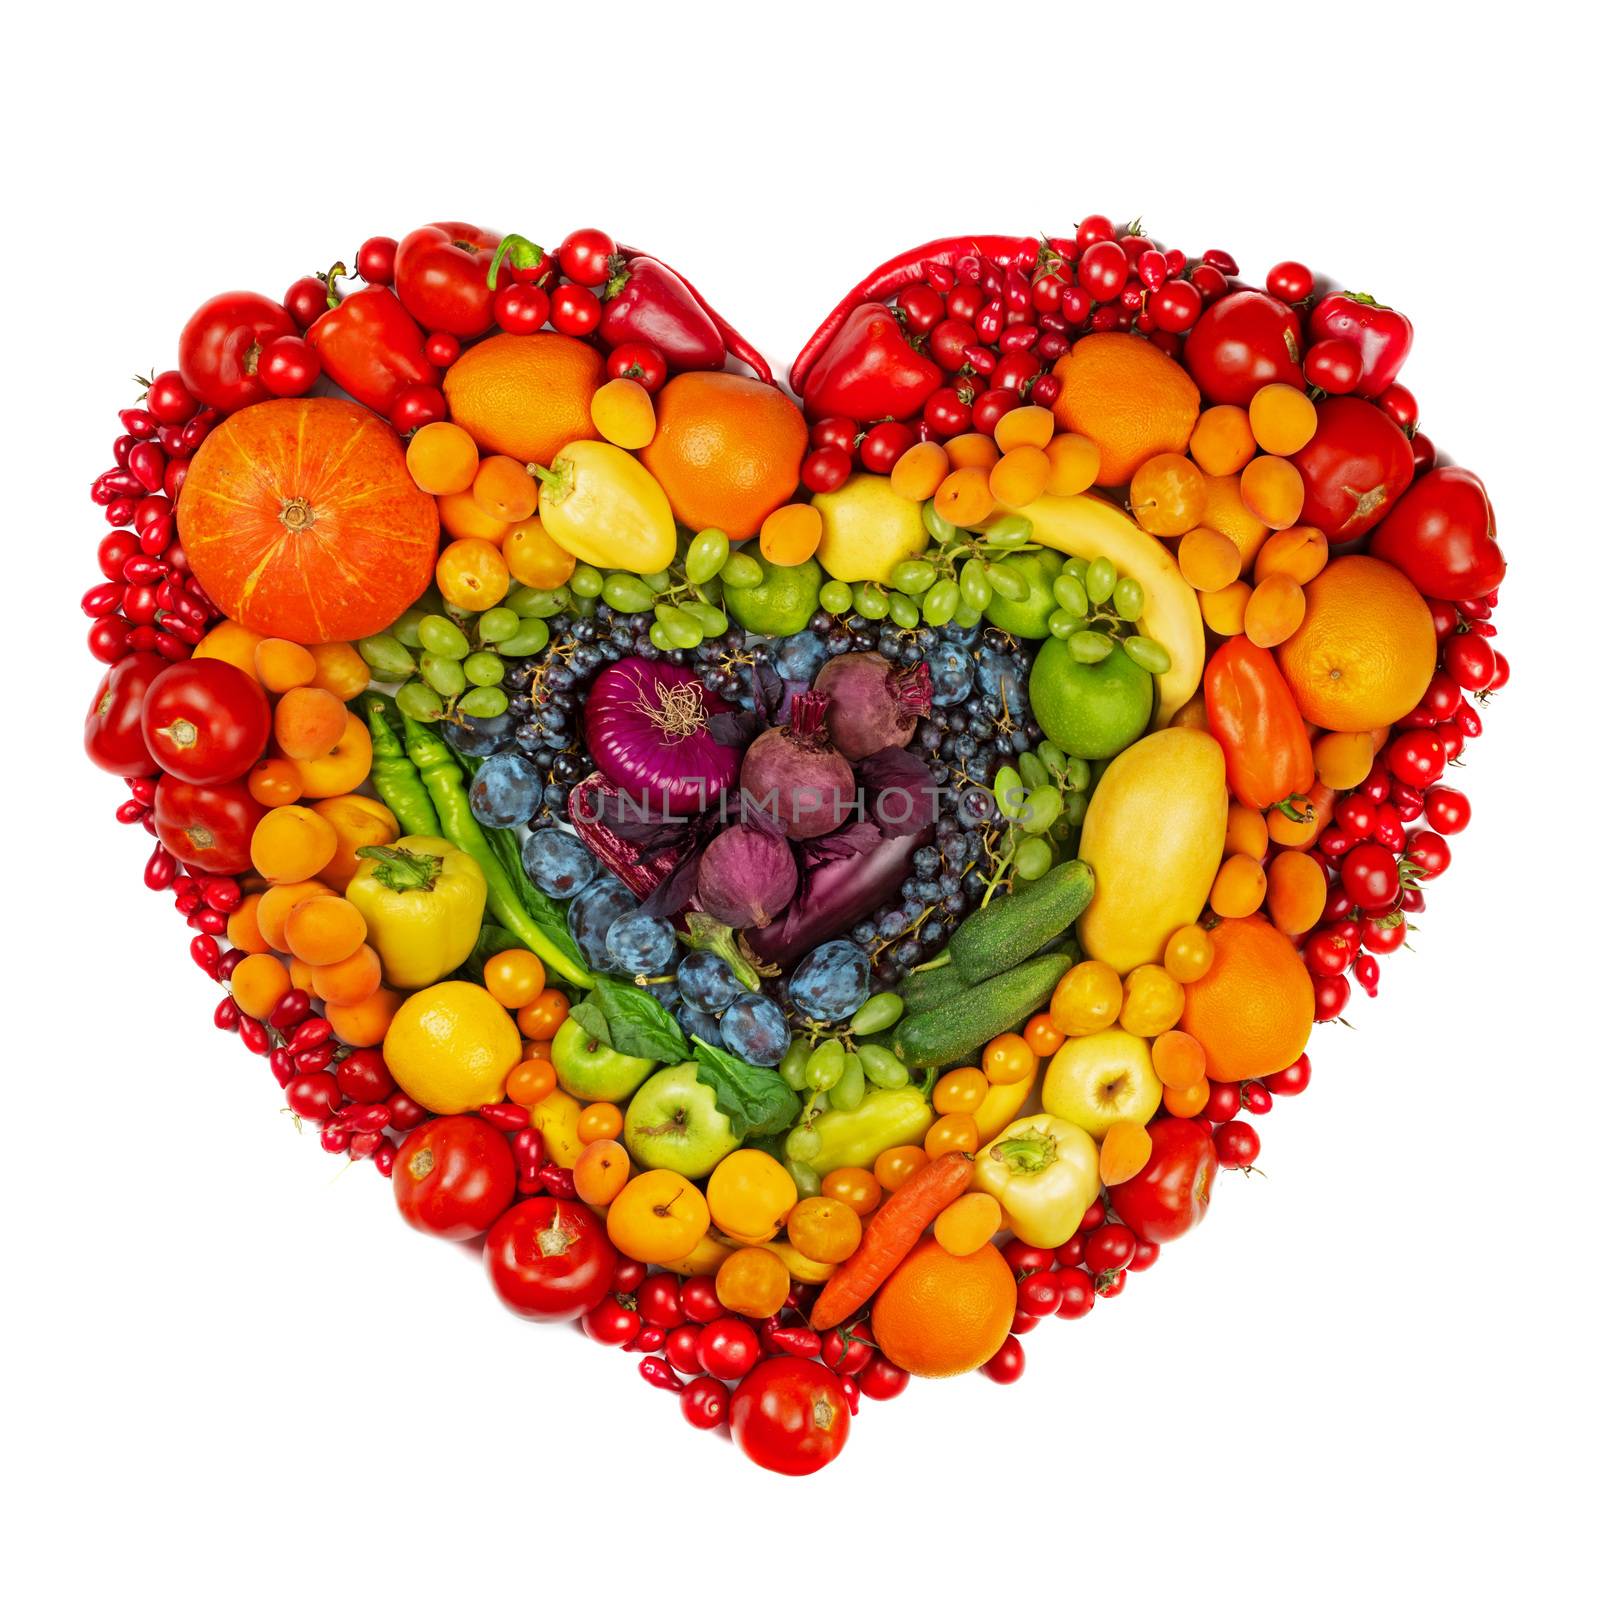 Rainbow heart of fruits and vegetables studio isolated on white background go vegetarian love healthy eating concept